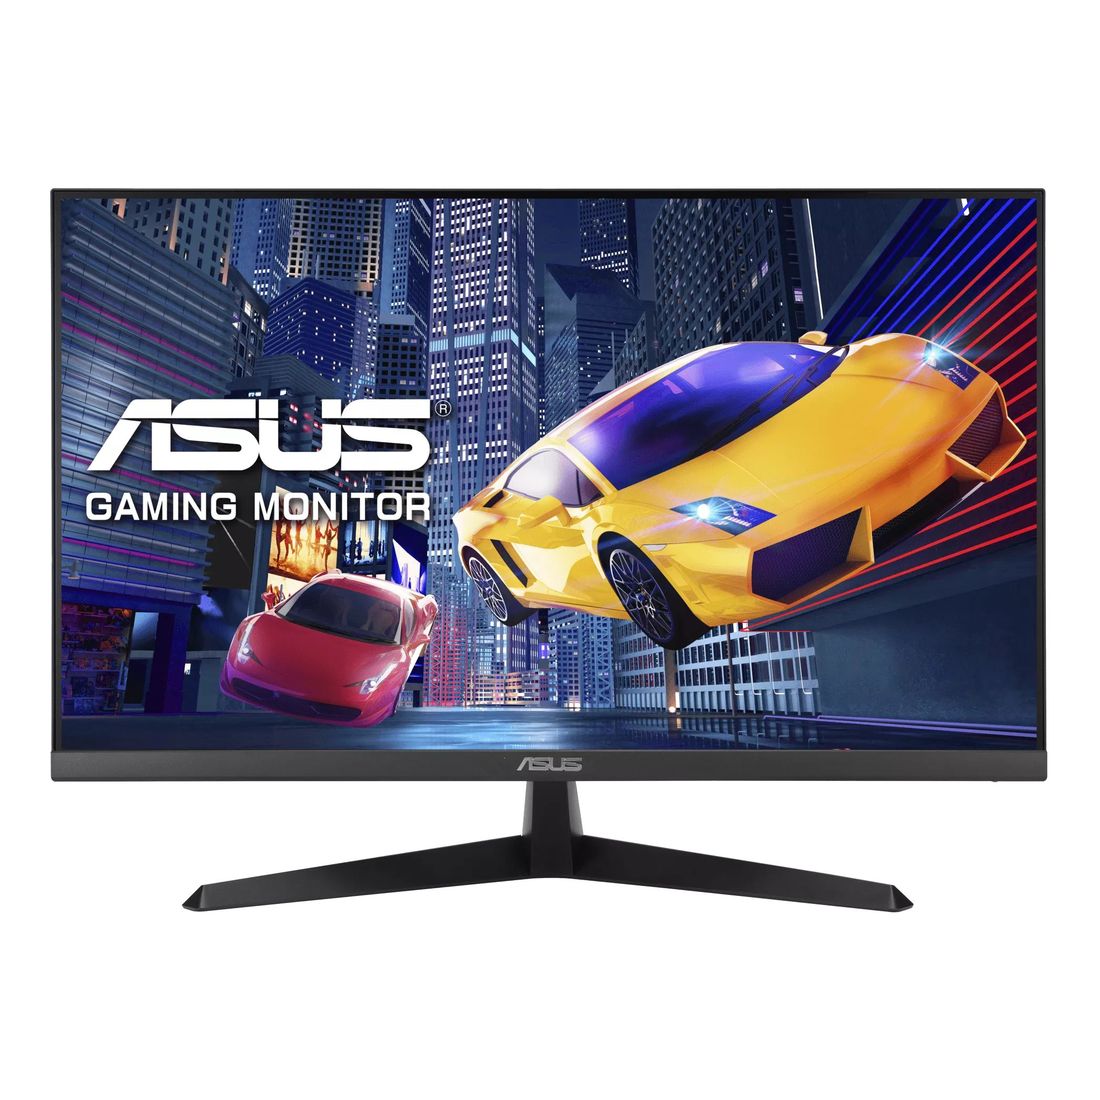 ASUS VY279HGE Eye Care Gaming Monitor – 27-Inch FHD (1920x1080) IPS 144Hz